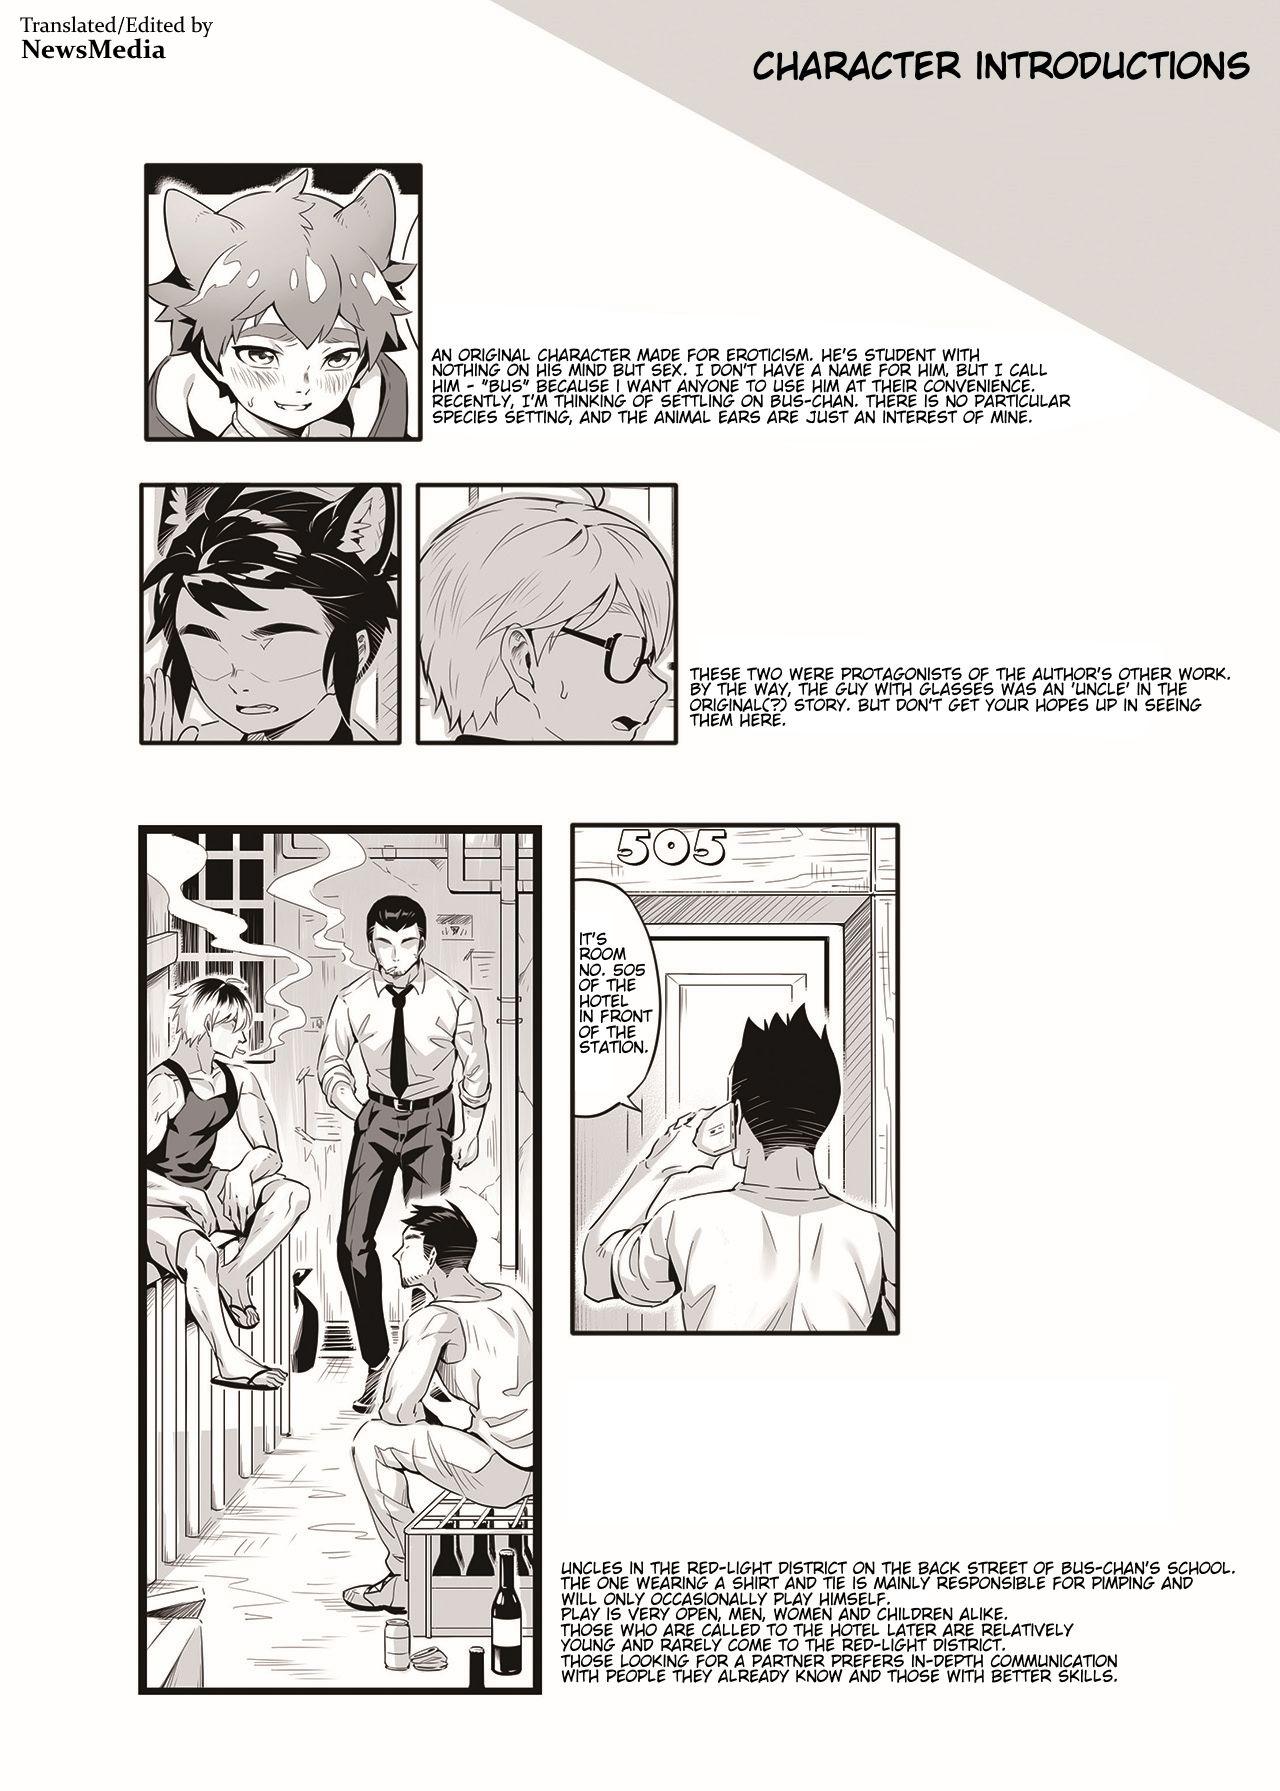 Married Back Alley - Original Old Vs Young - Page 4